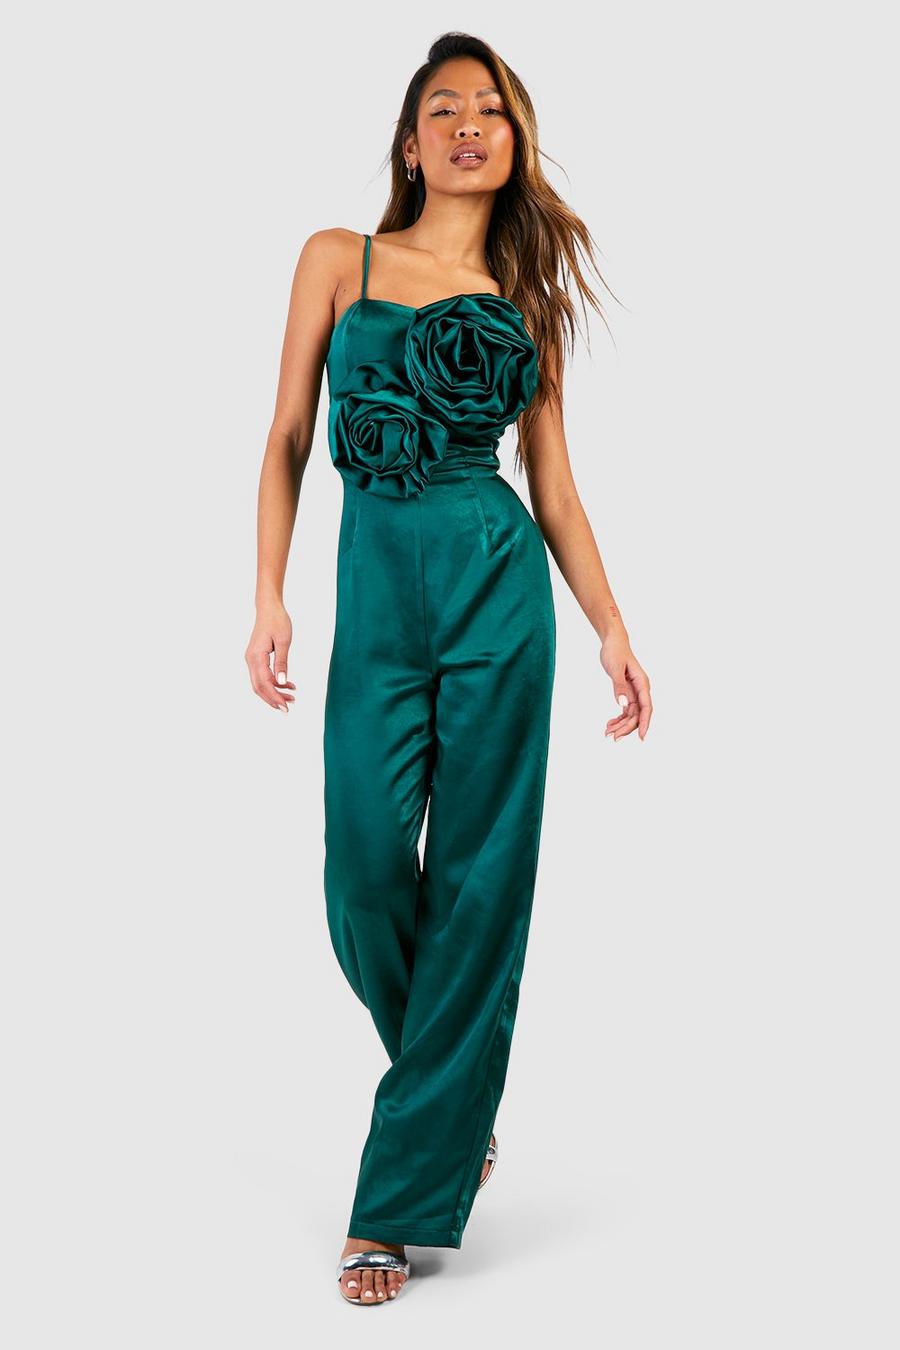 Teal Rose Front Strappy Jumpsuit